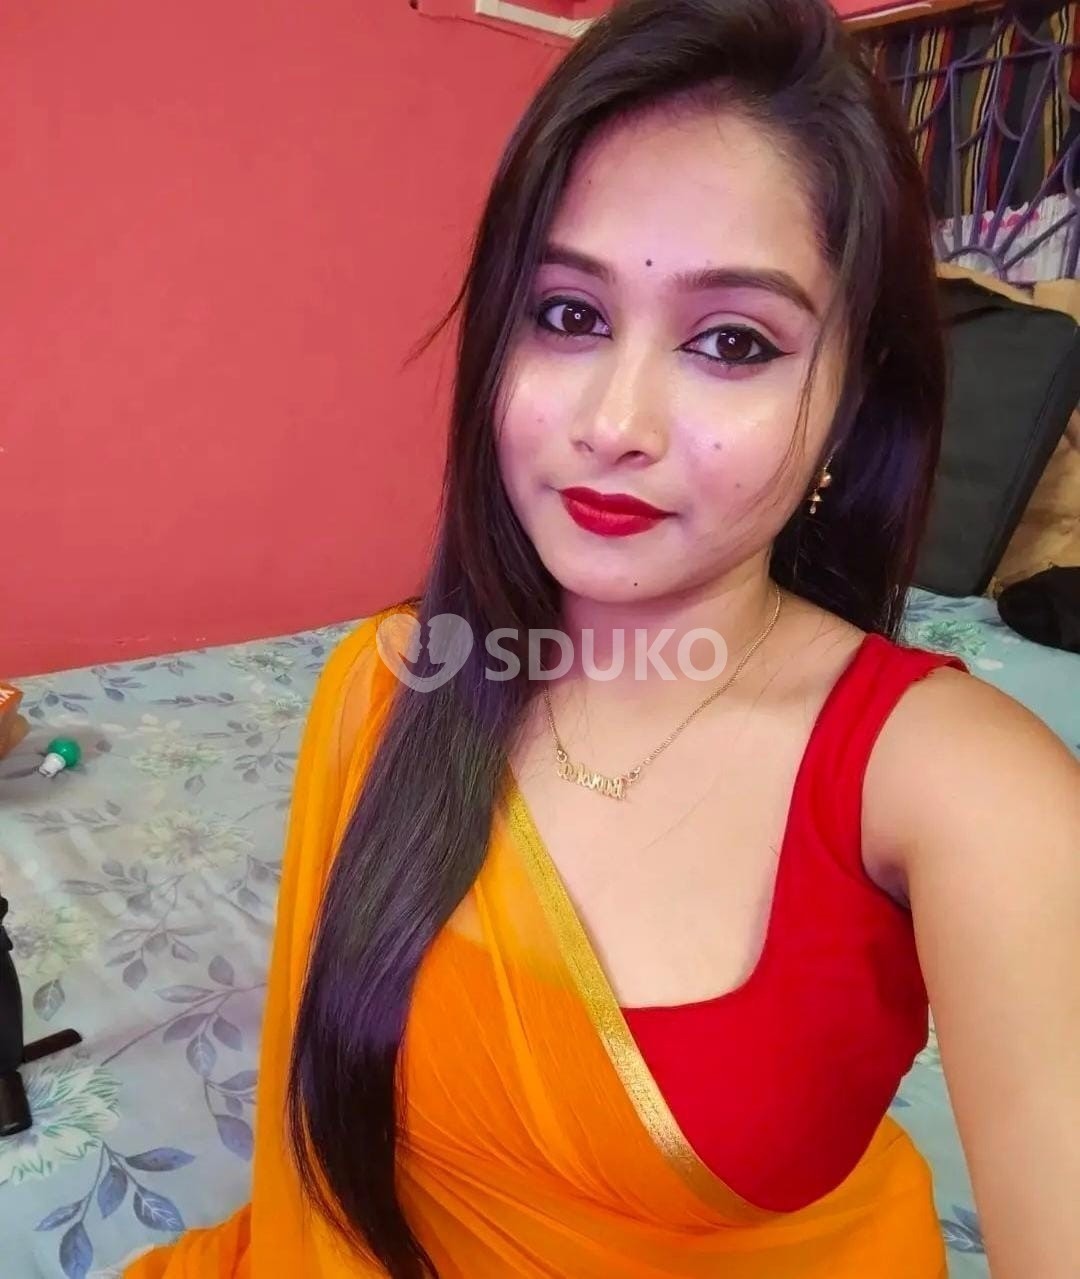 Bhiwani nimisha Low price 100% genuine 👥 sexy VIP call girls are provided👌safe and secure service .call 📞,,24 h